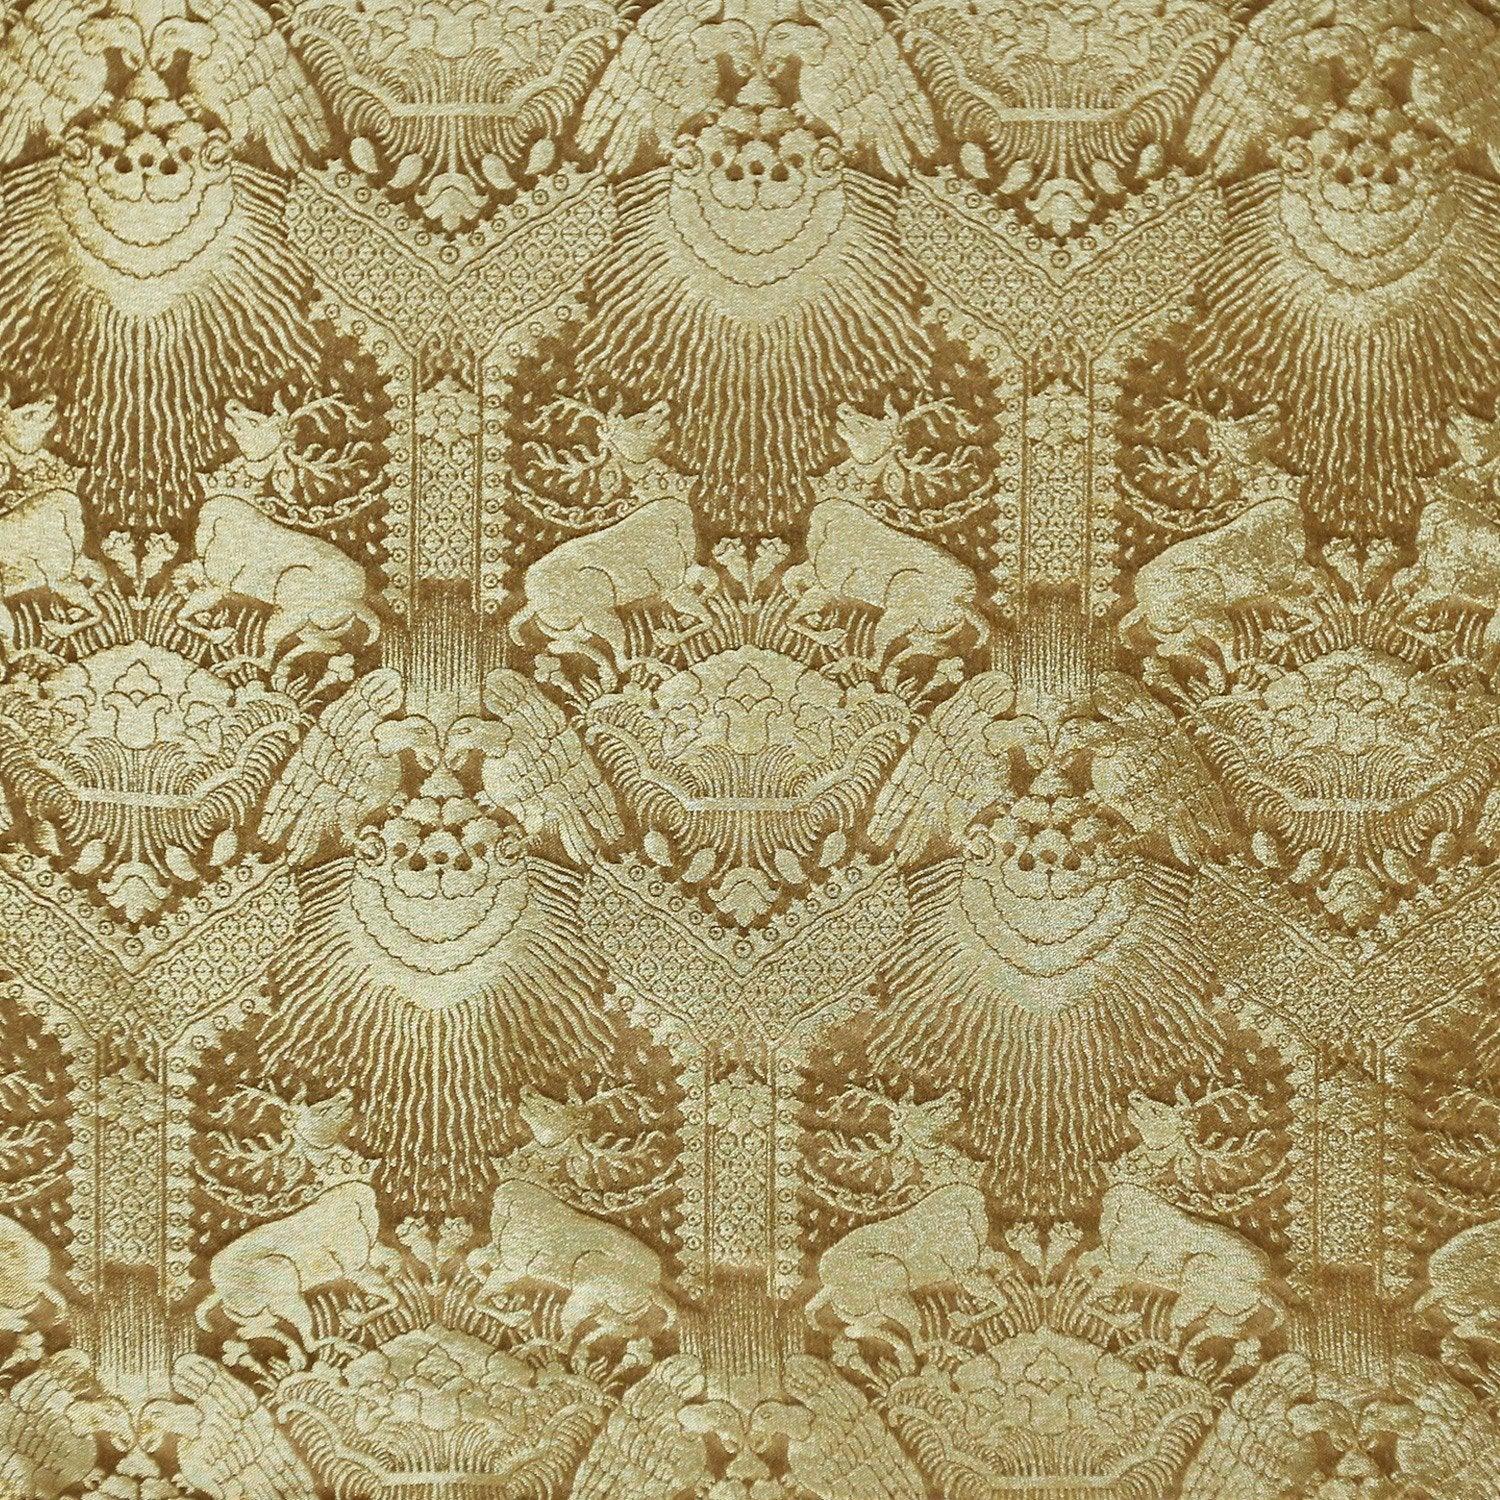 Stag, Cloth of Gold Damask - Watts & Co. (international)